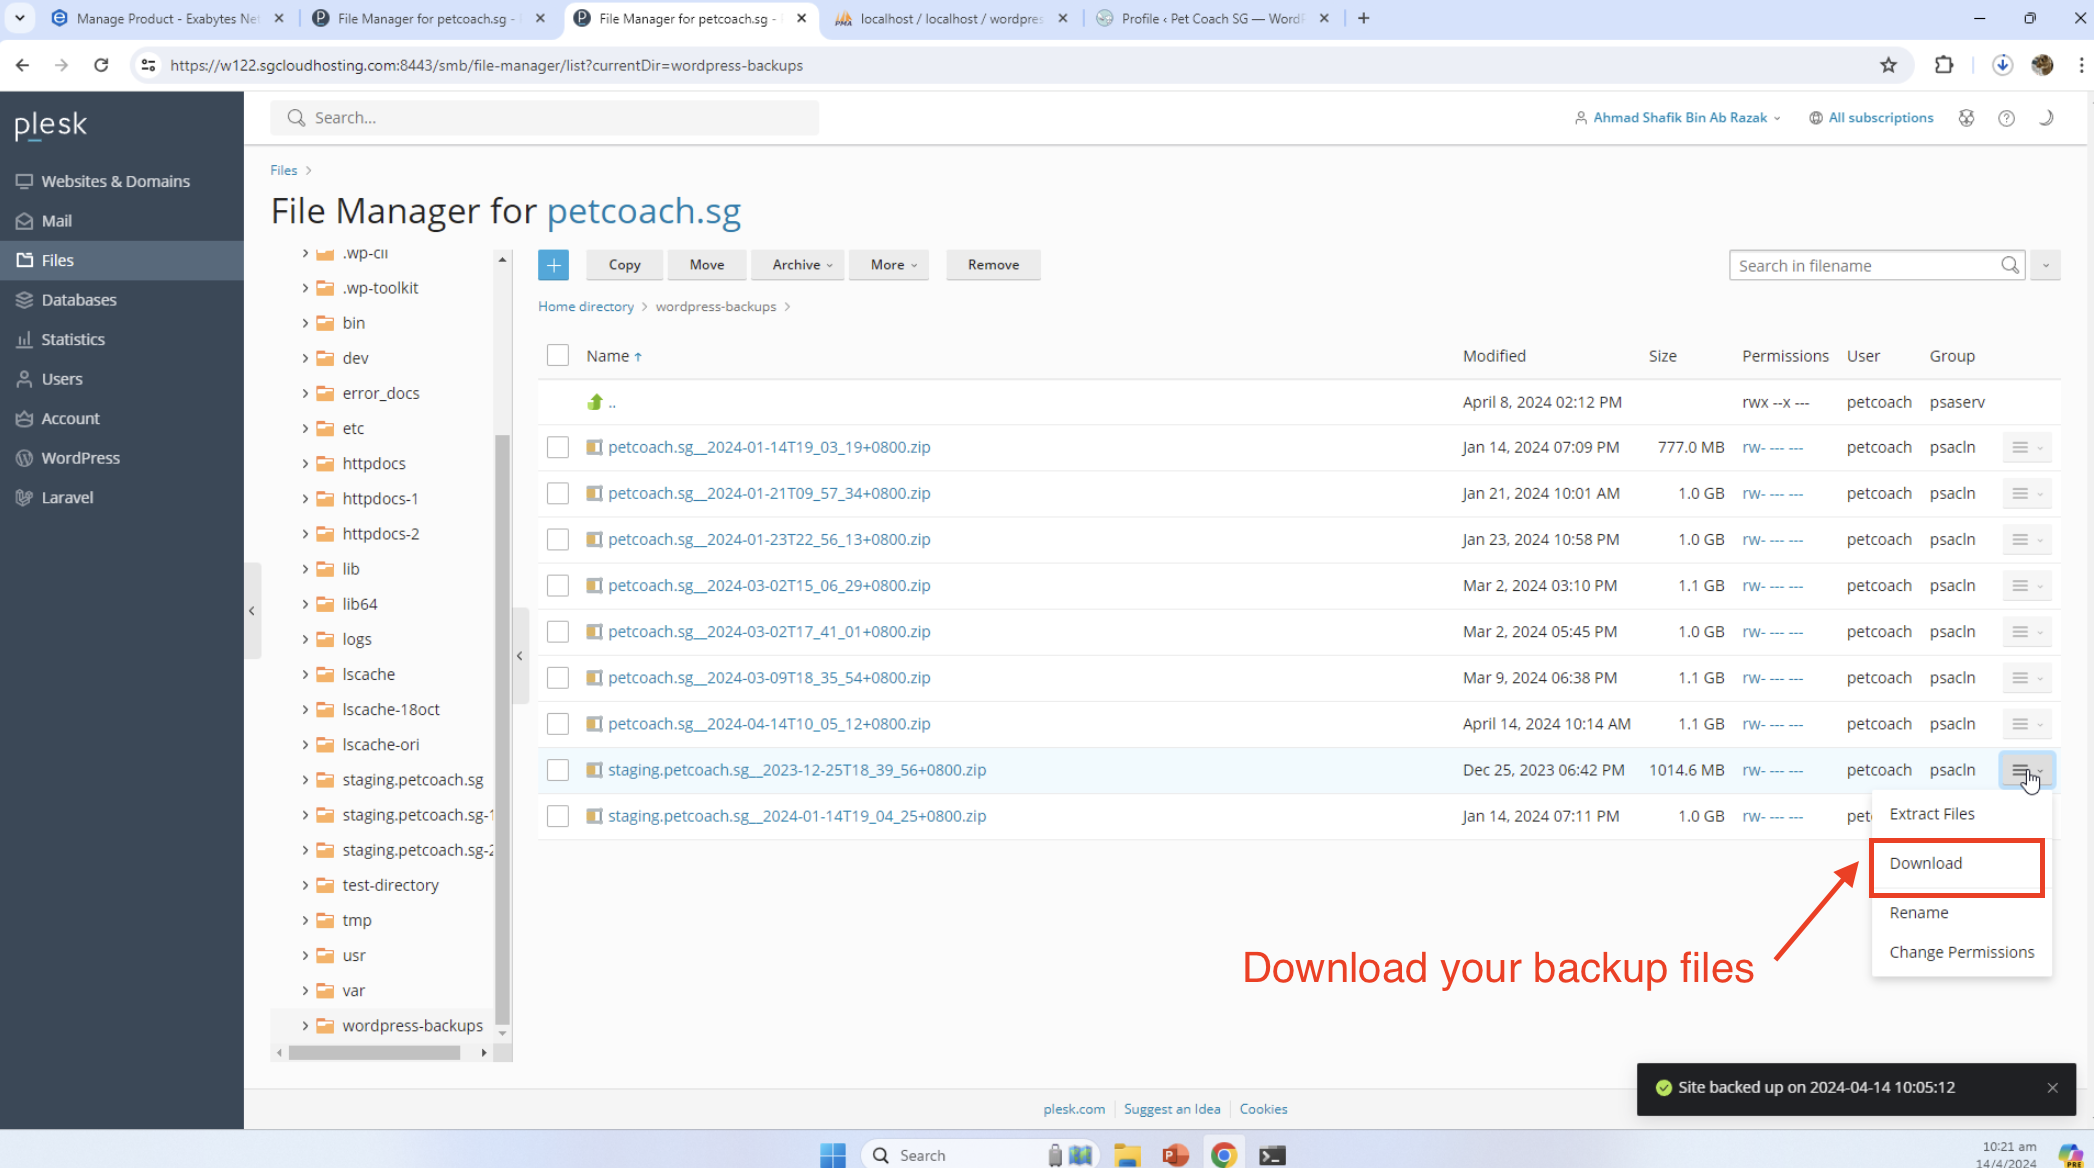 image of downloading the backup files from Plesk console